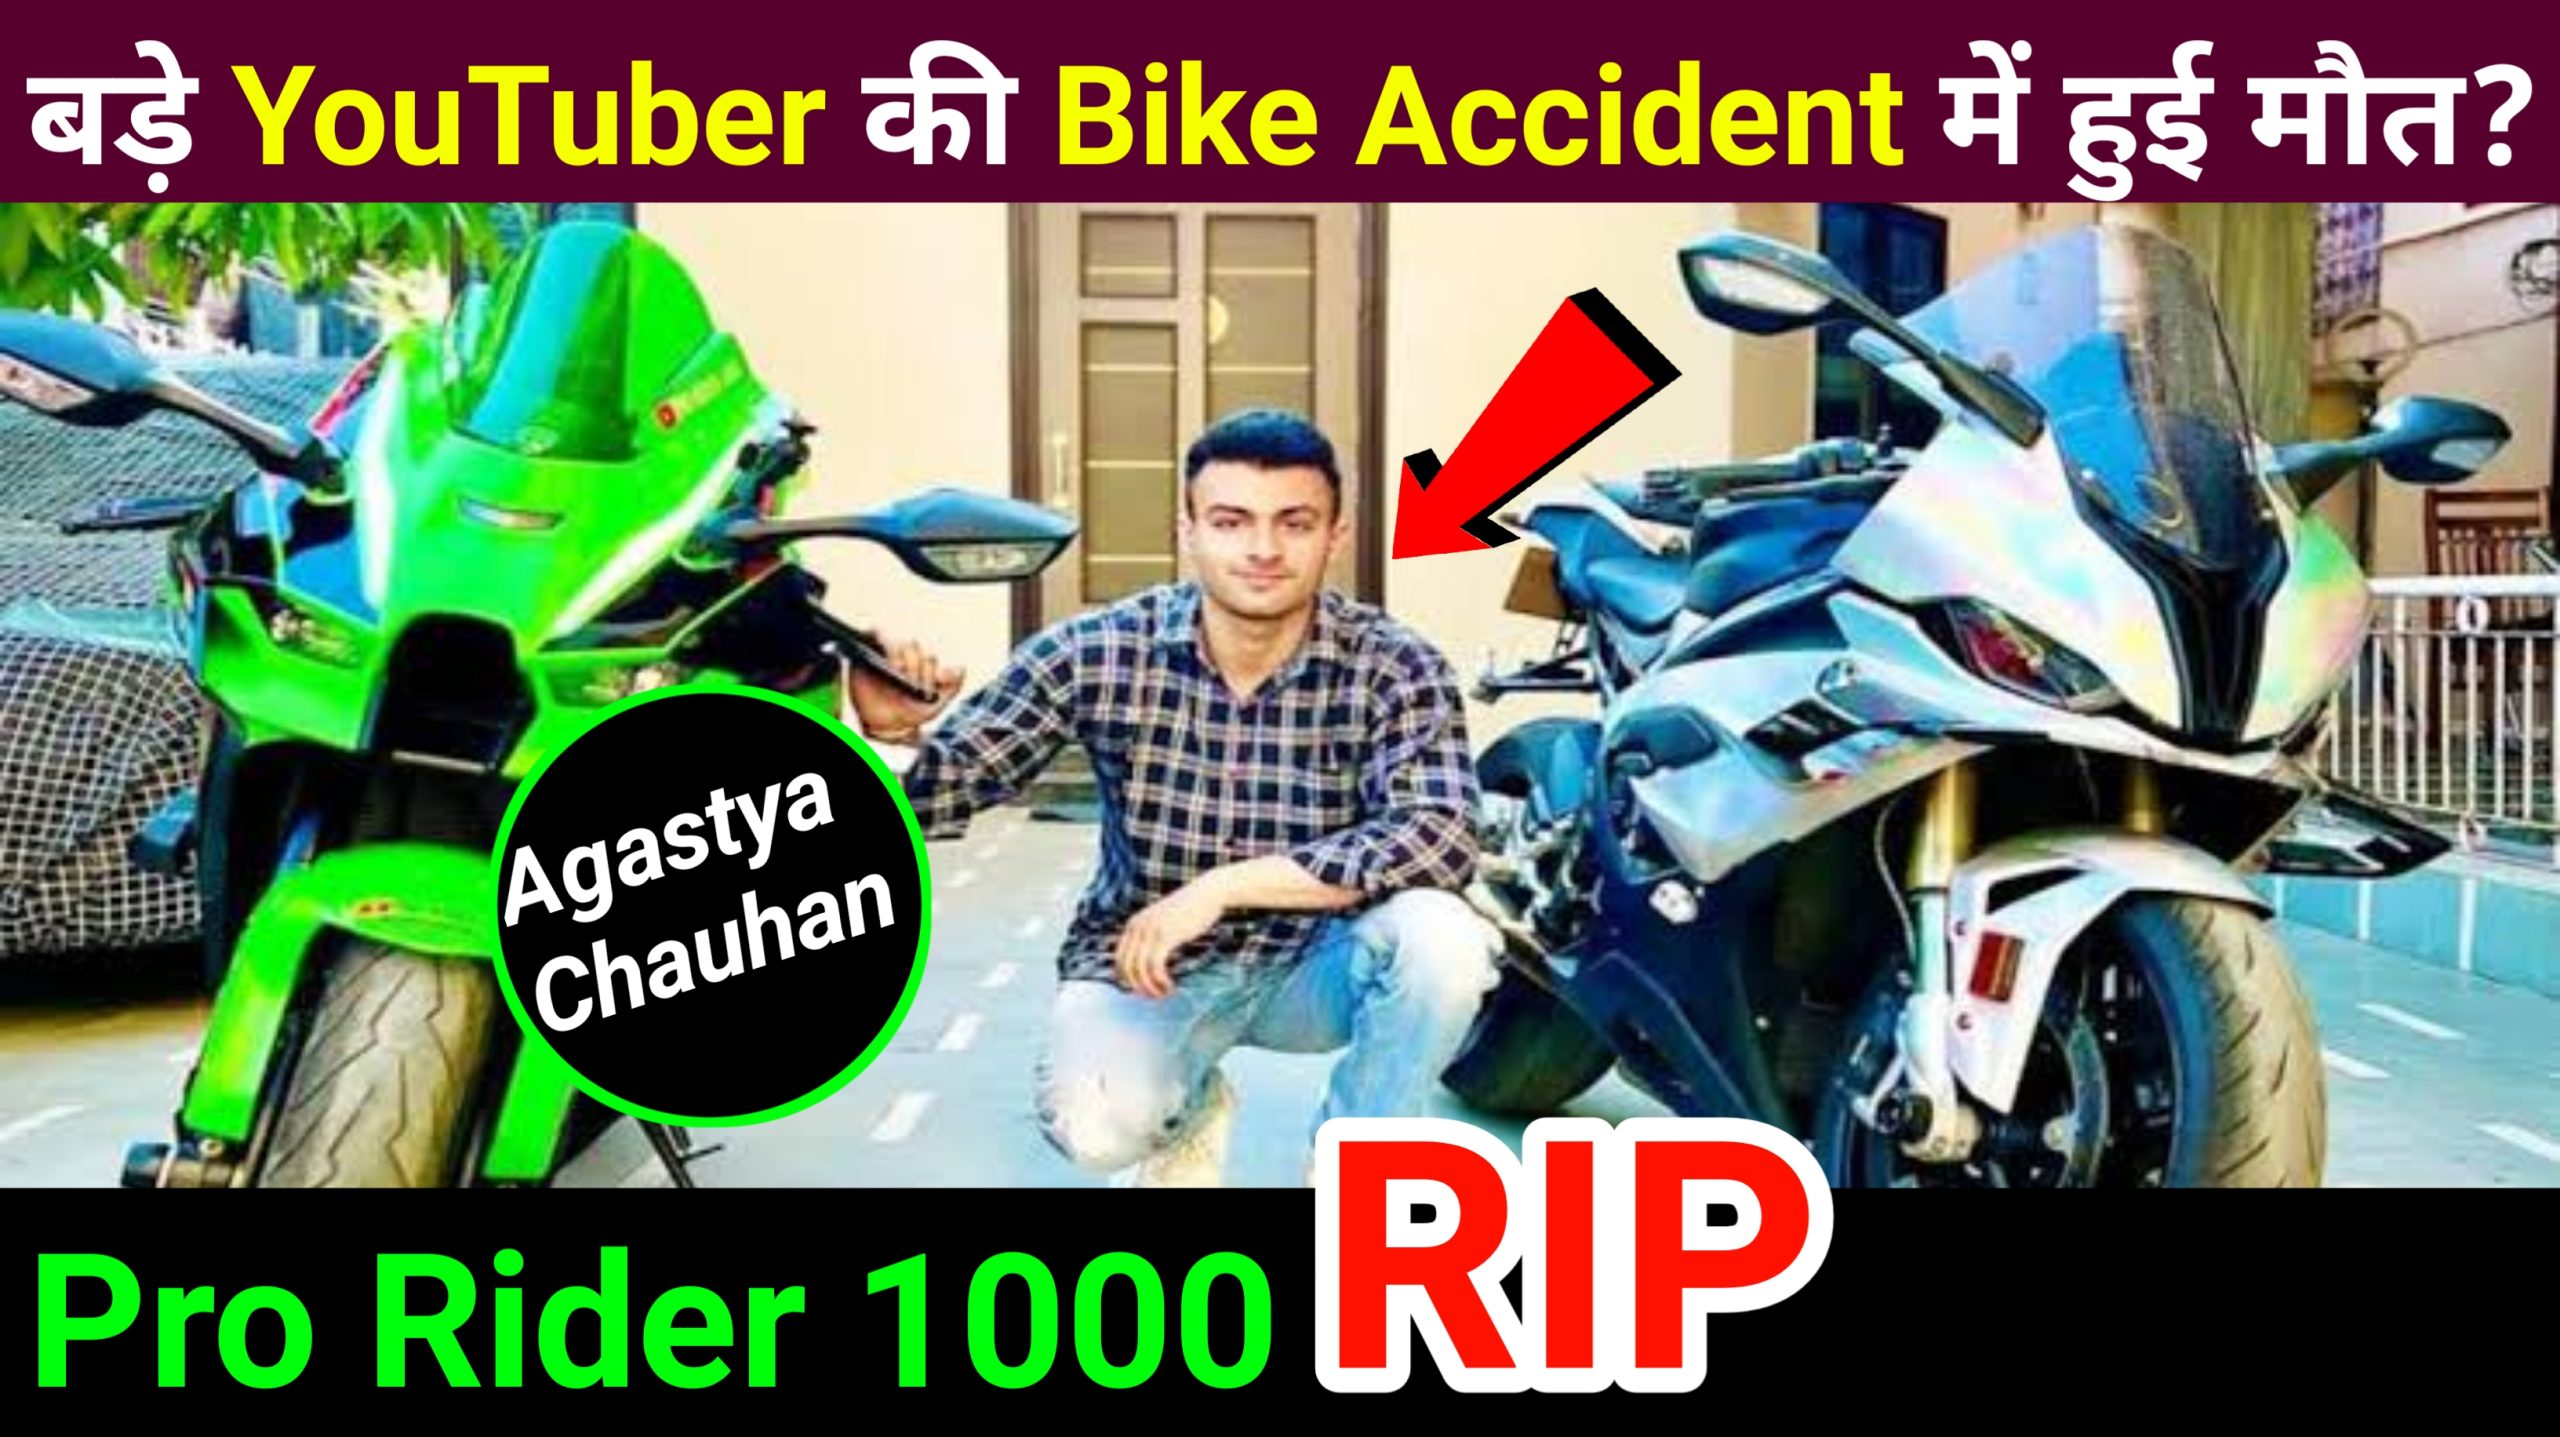 YouTuber Agastya Chauhan Accident